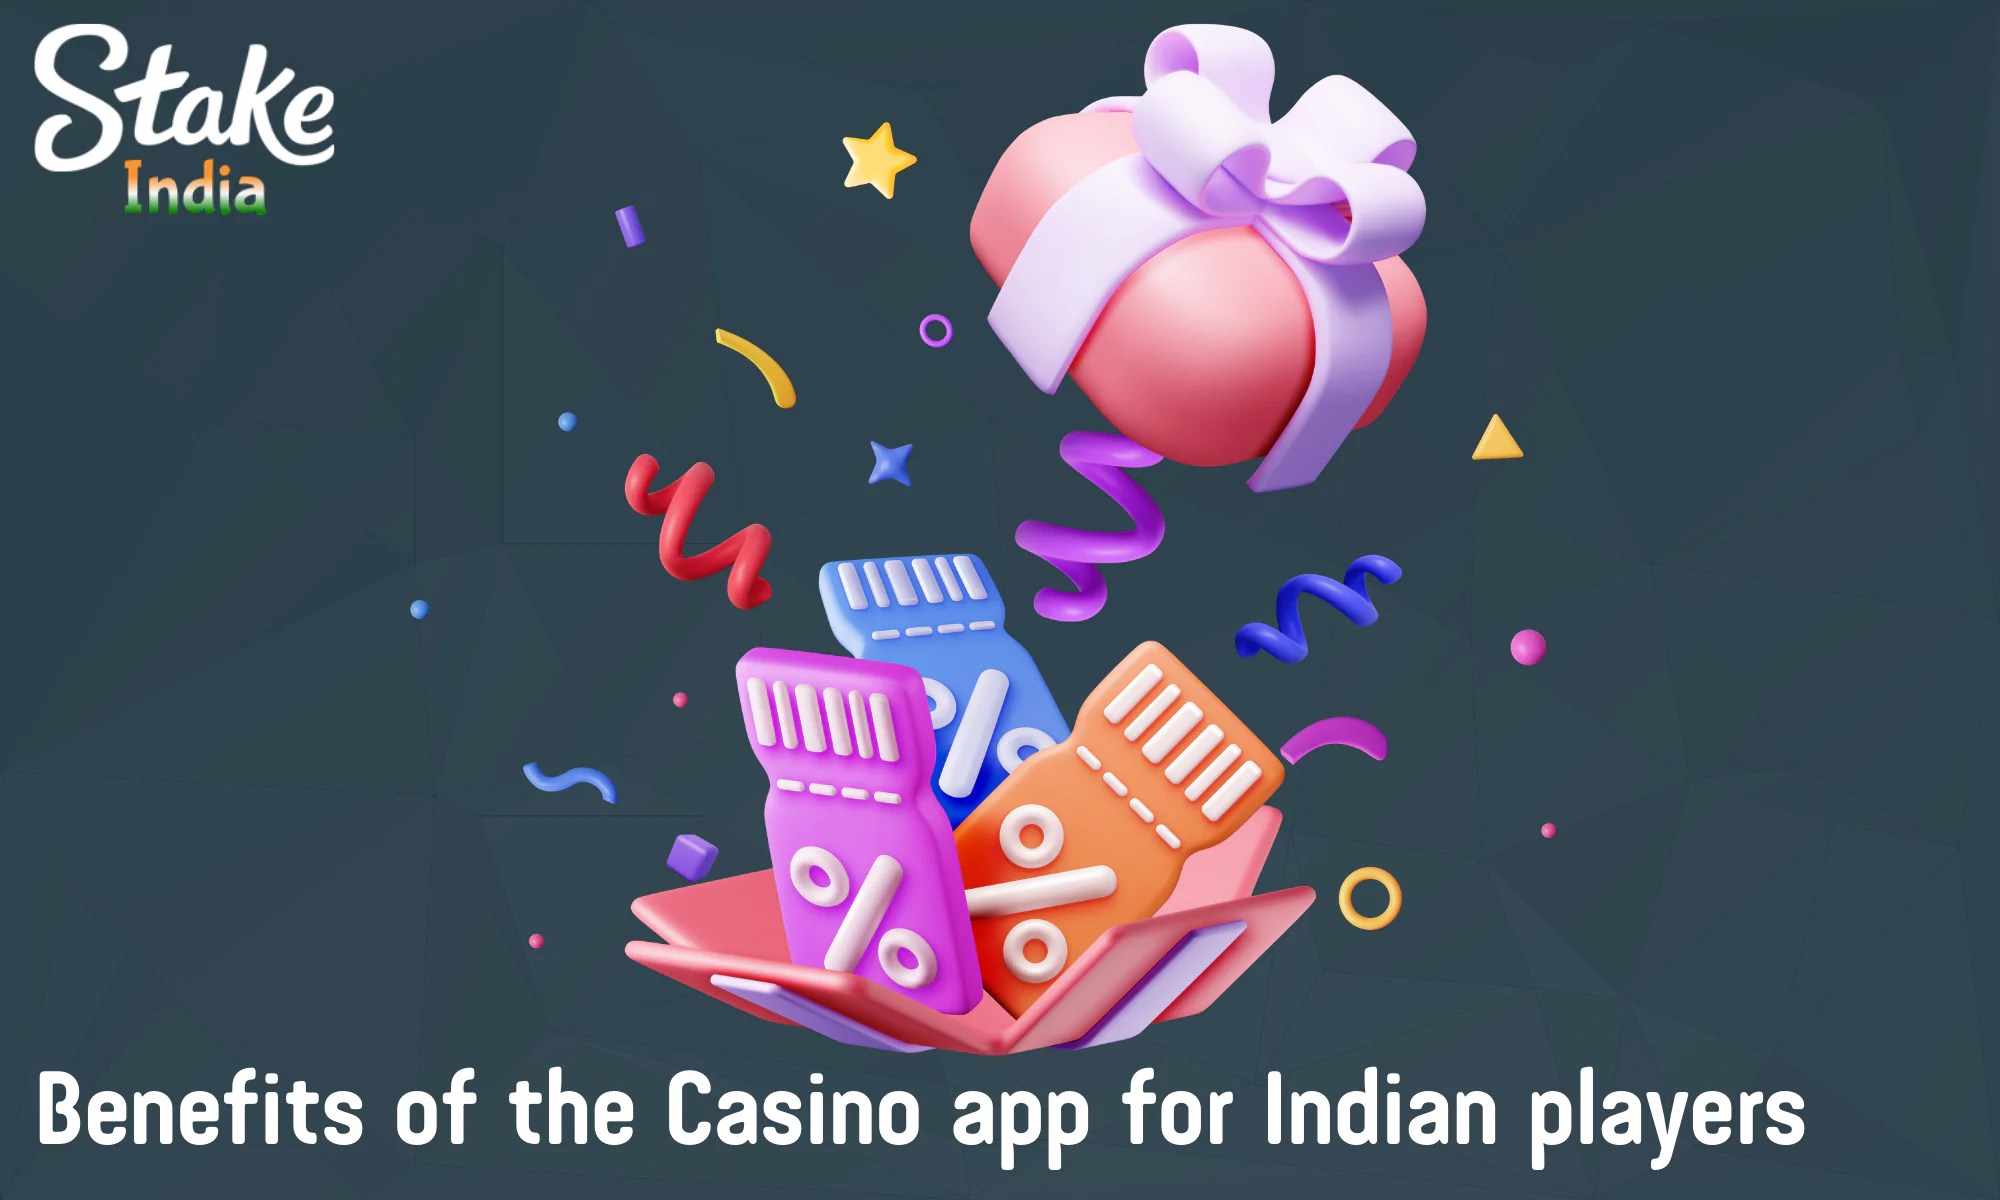 The list of advantages offered by the Stake Casino app